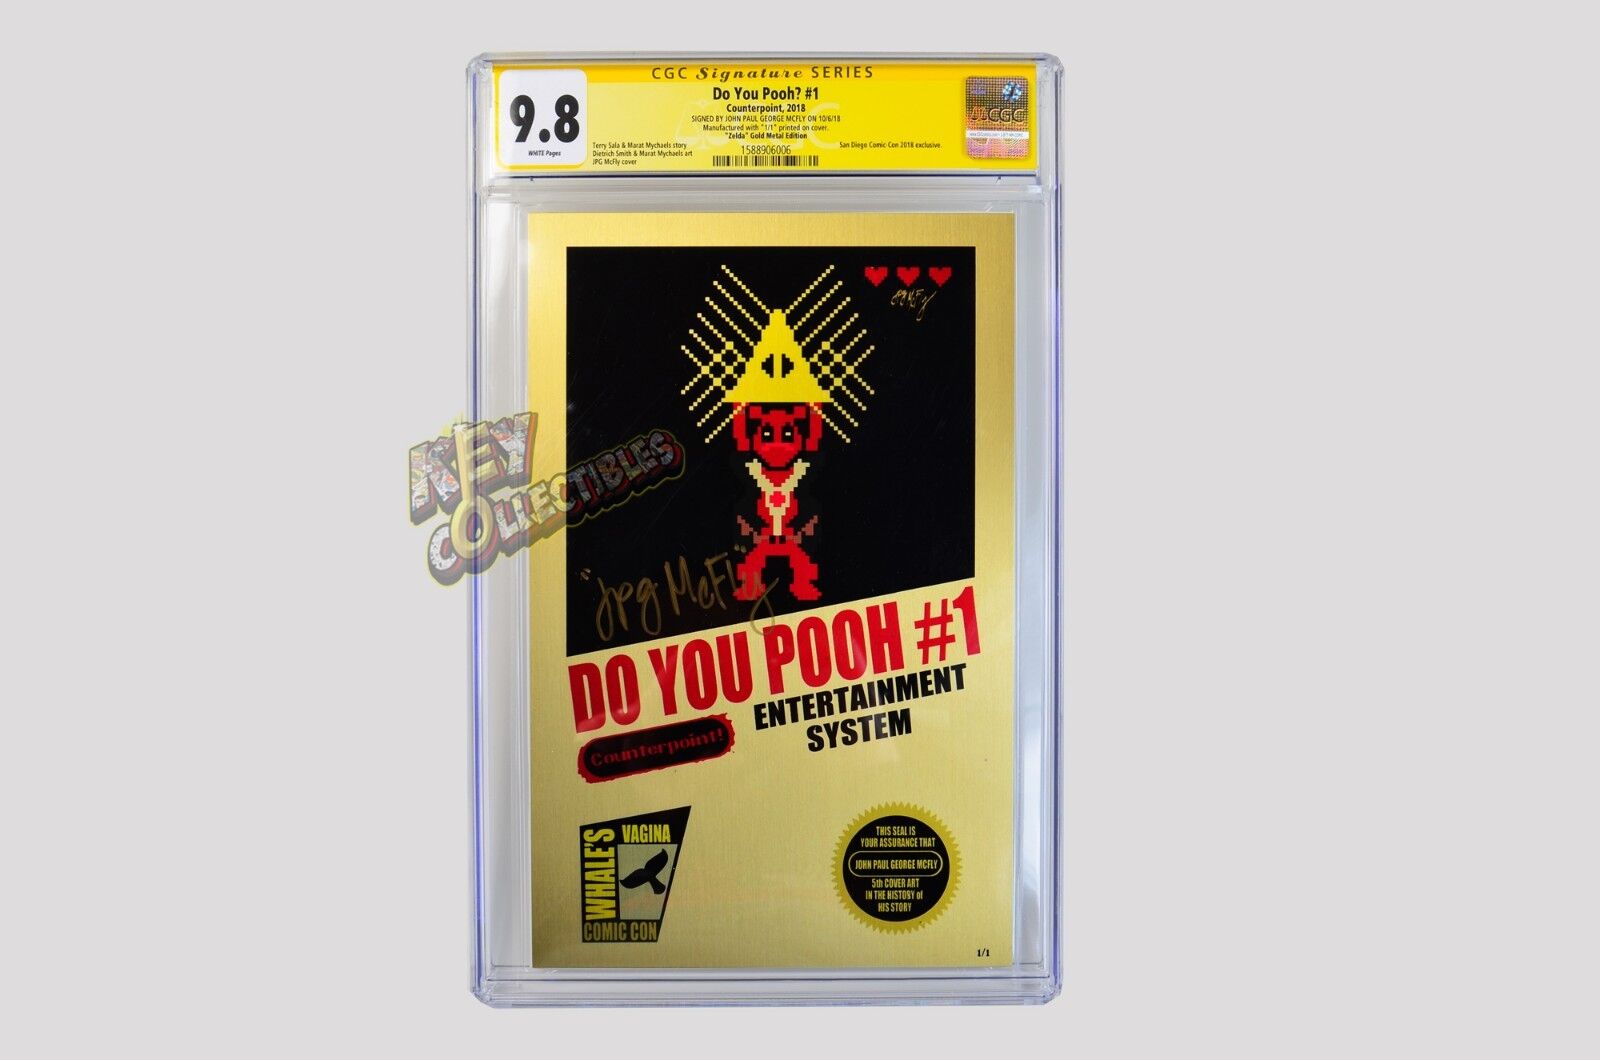 Do You Pooh? #1 Legend Of Zelda METAL COVER 1 OF 1 - SIGNED JPG MCFLY CGC 9.8